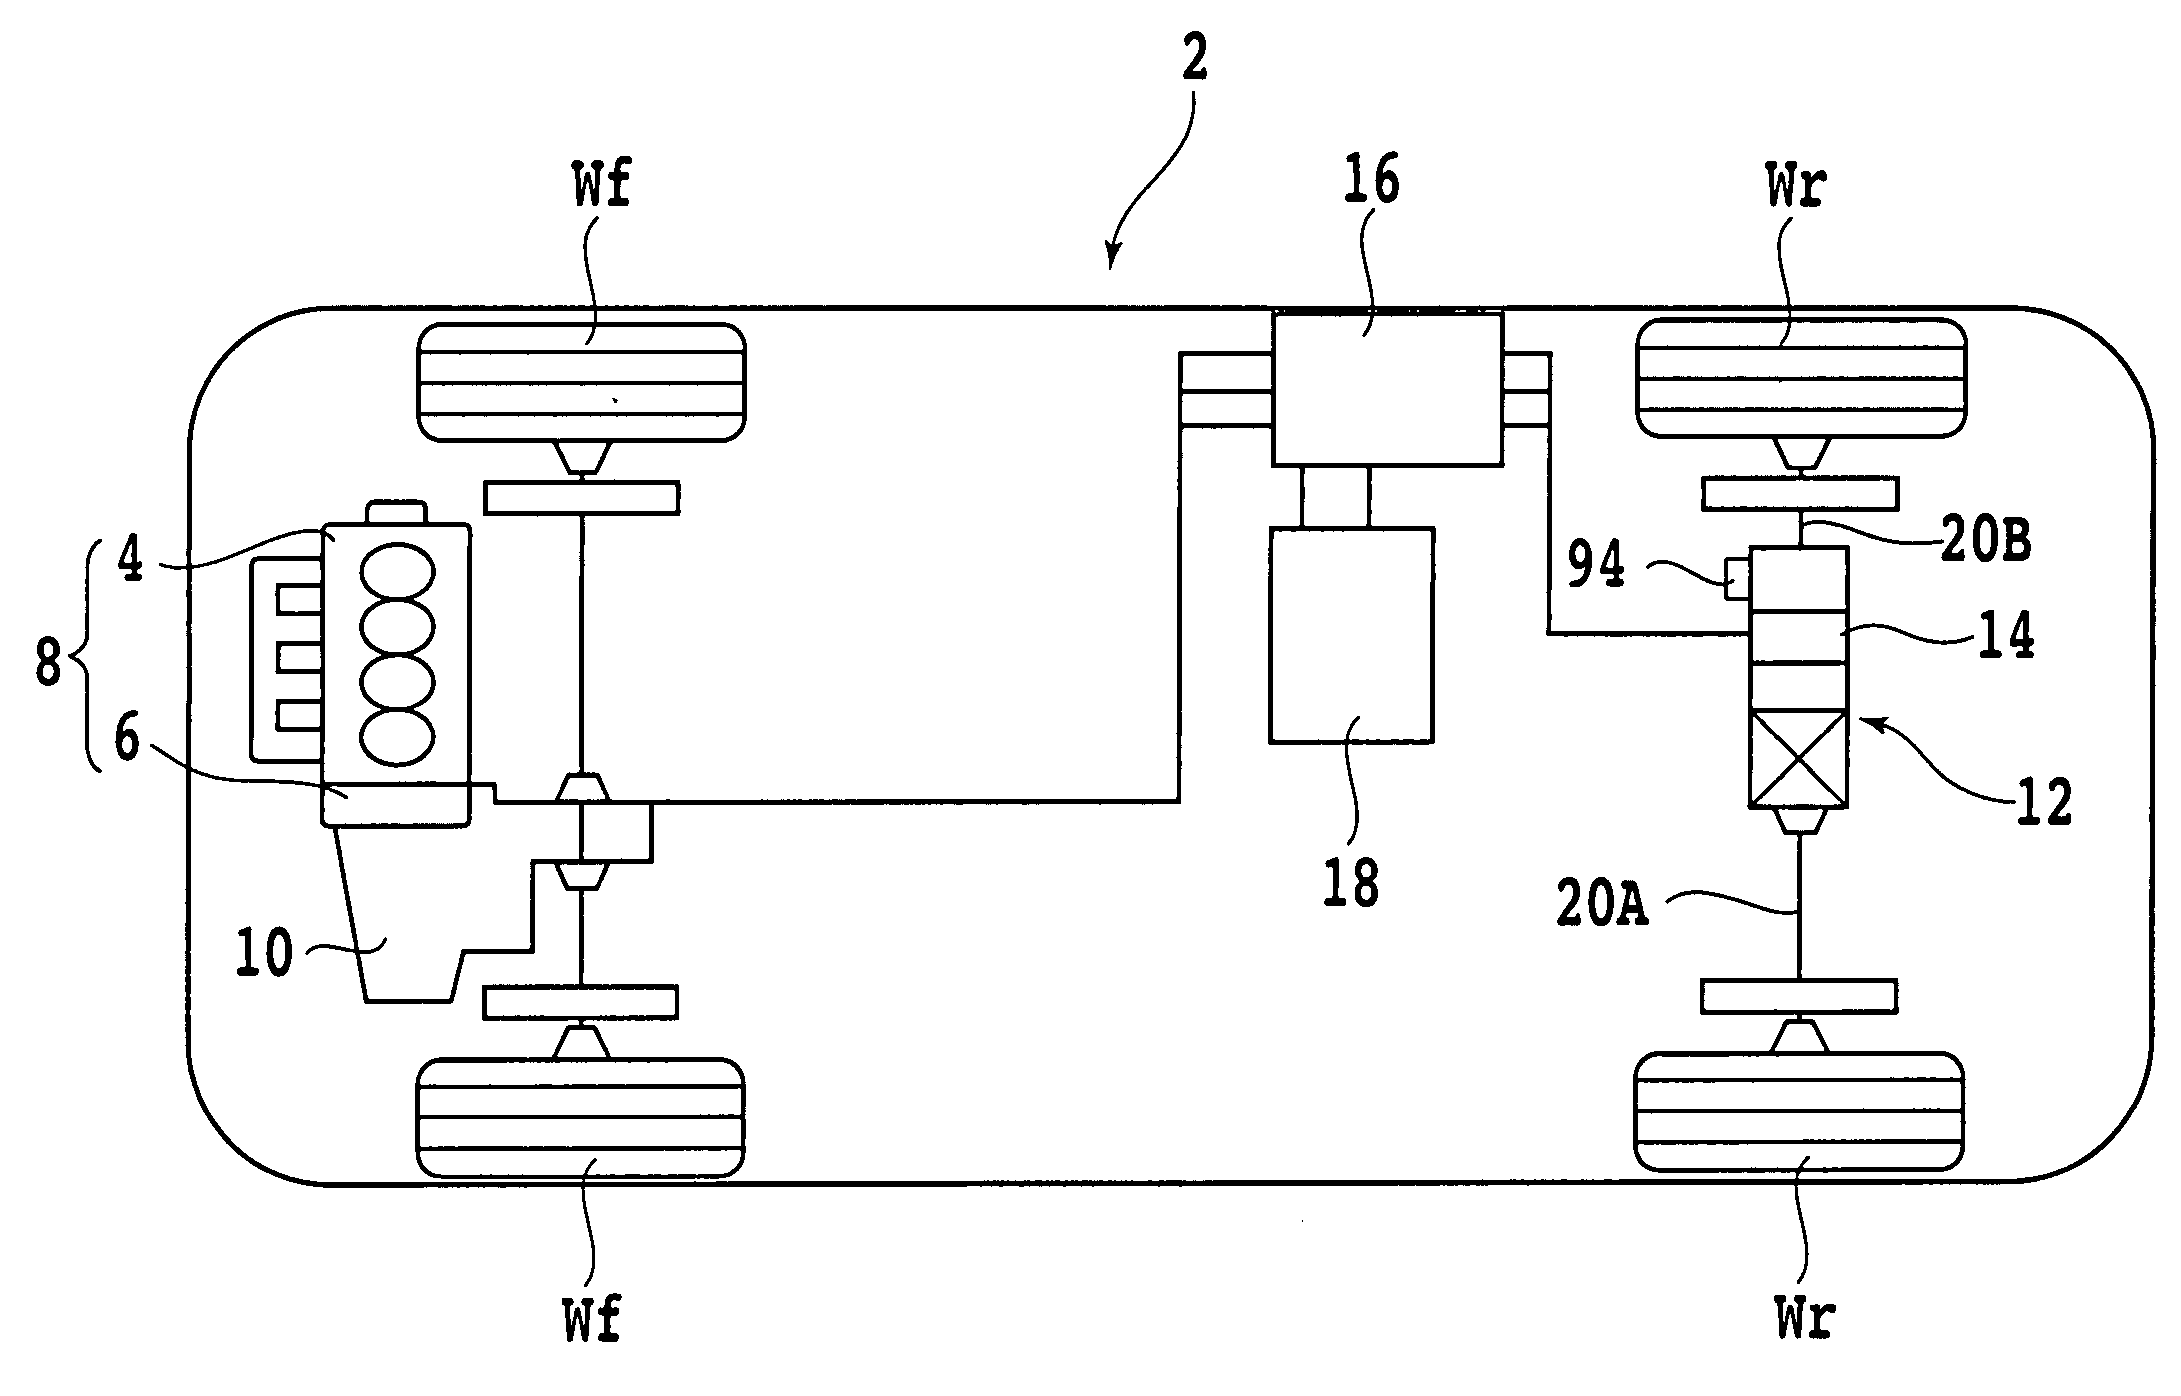 Power transmitting device for vehicle